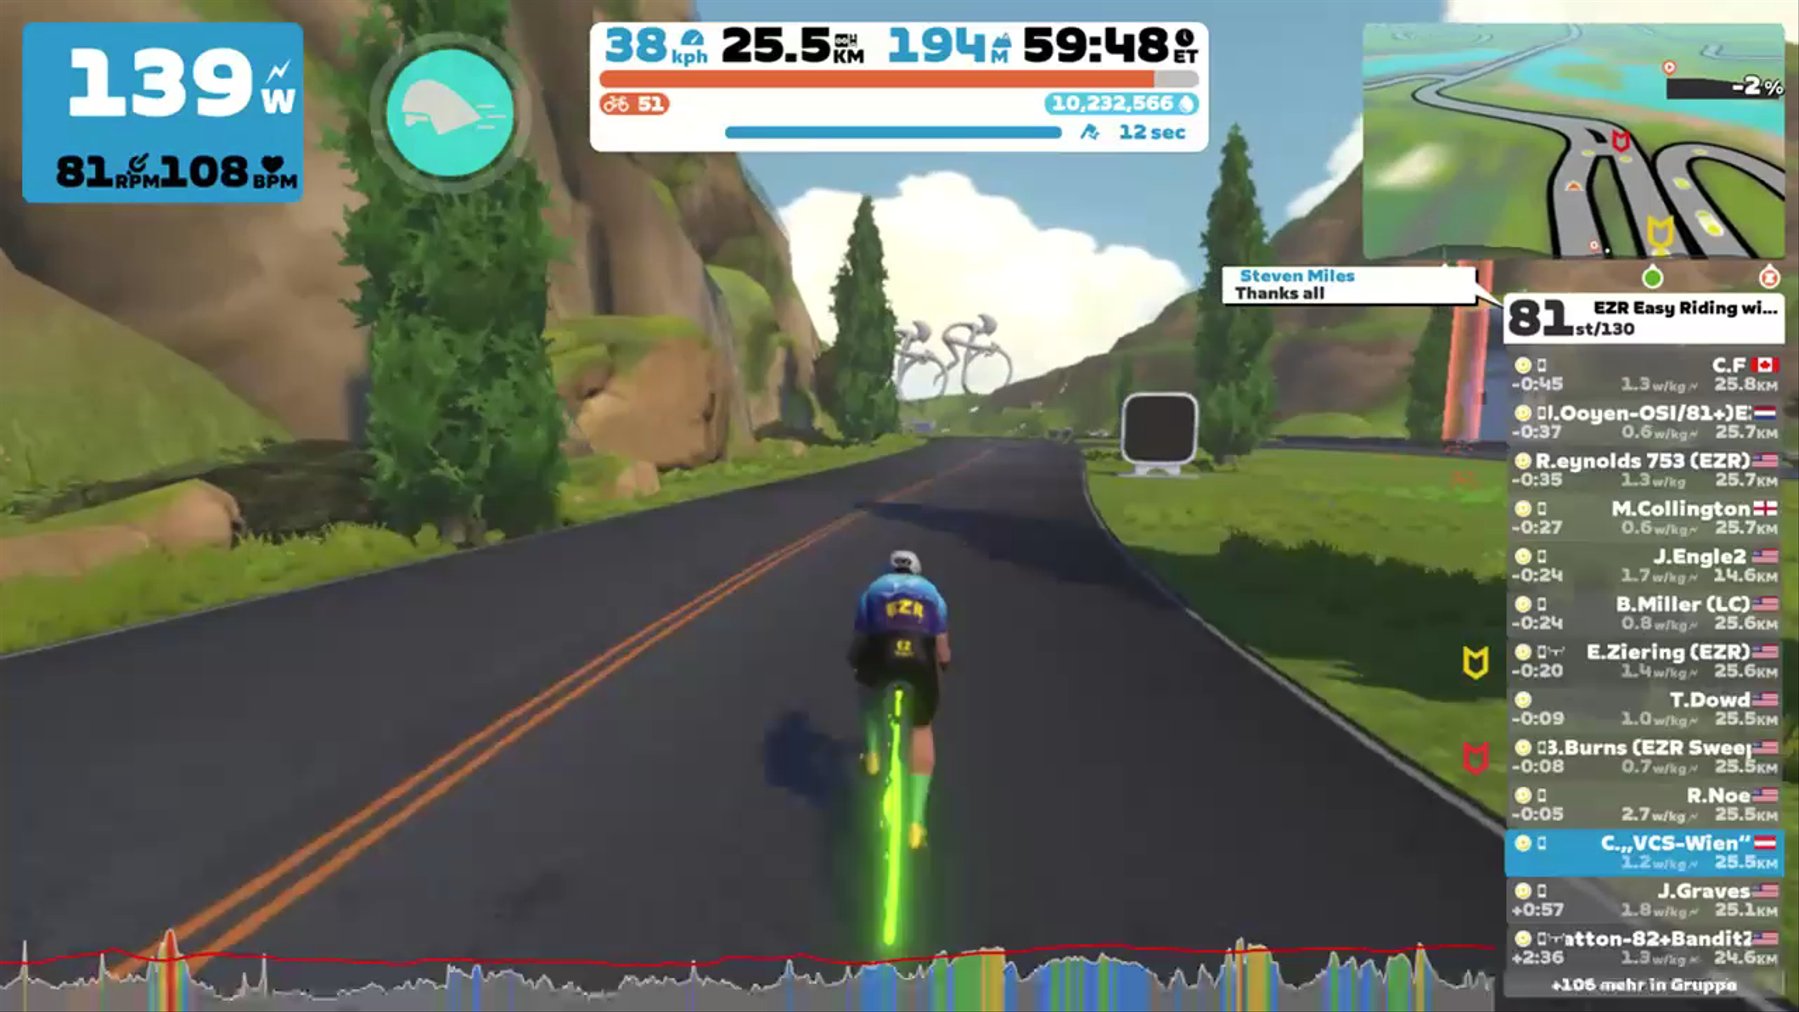 Zwift - Group Ride: EZR Easy Riding with EZ (D) on Ocean Lava Cliffside Loop in Watopia